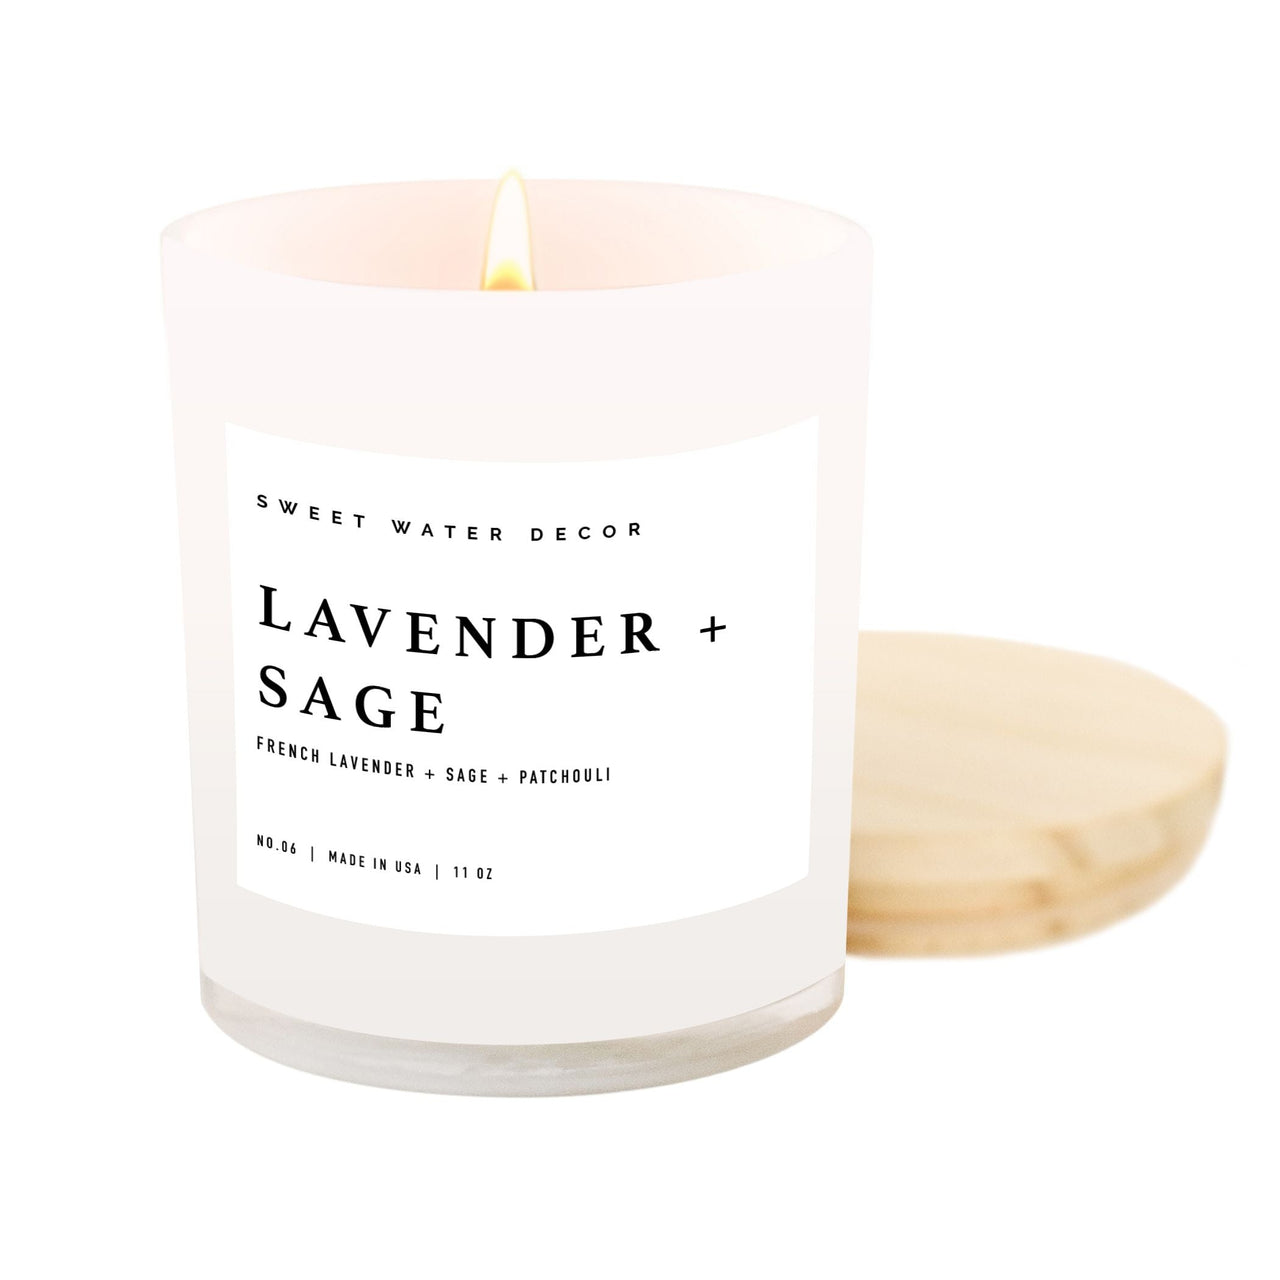 Lavender and Sage Soy Candle - White Jar - 11 oz - Tony's Home Furnishings